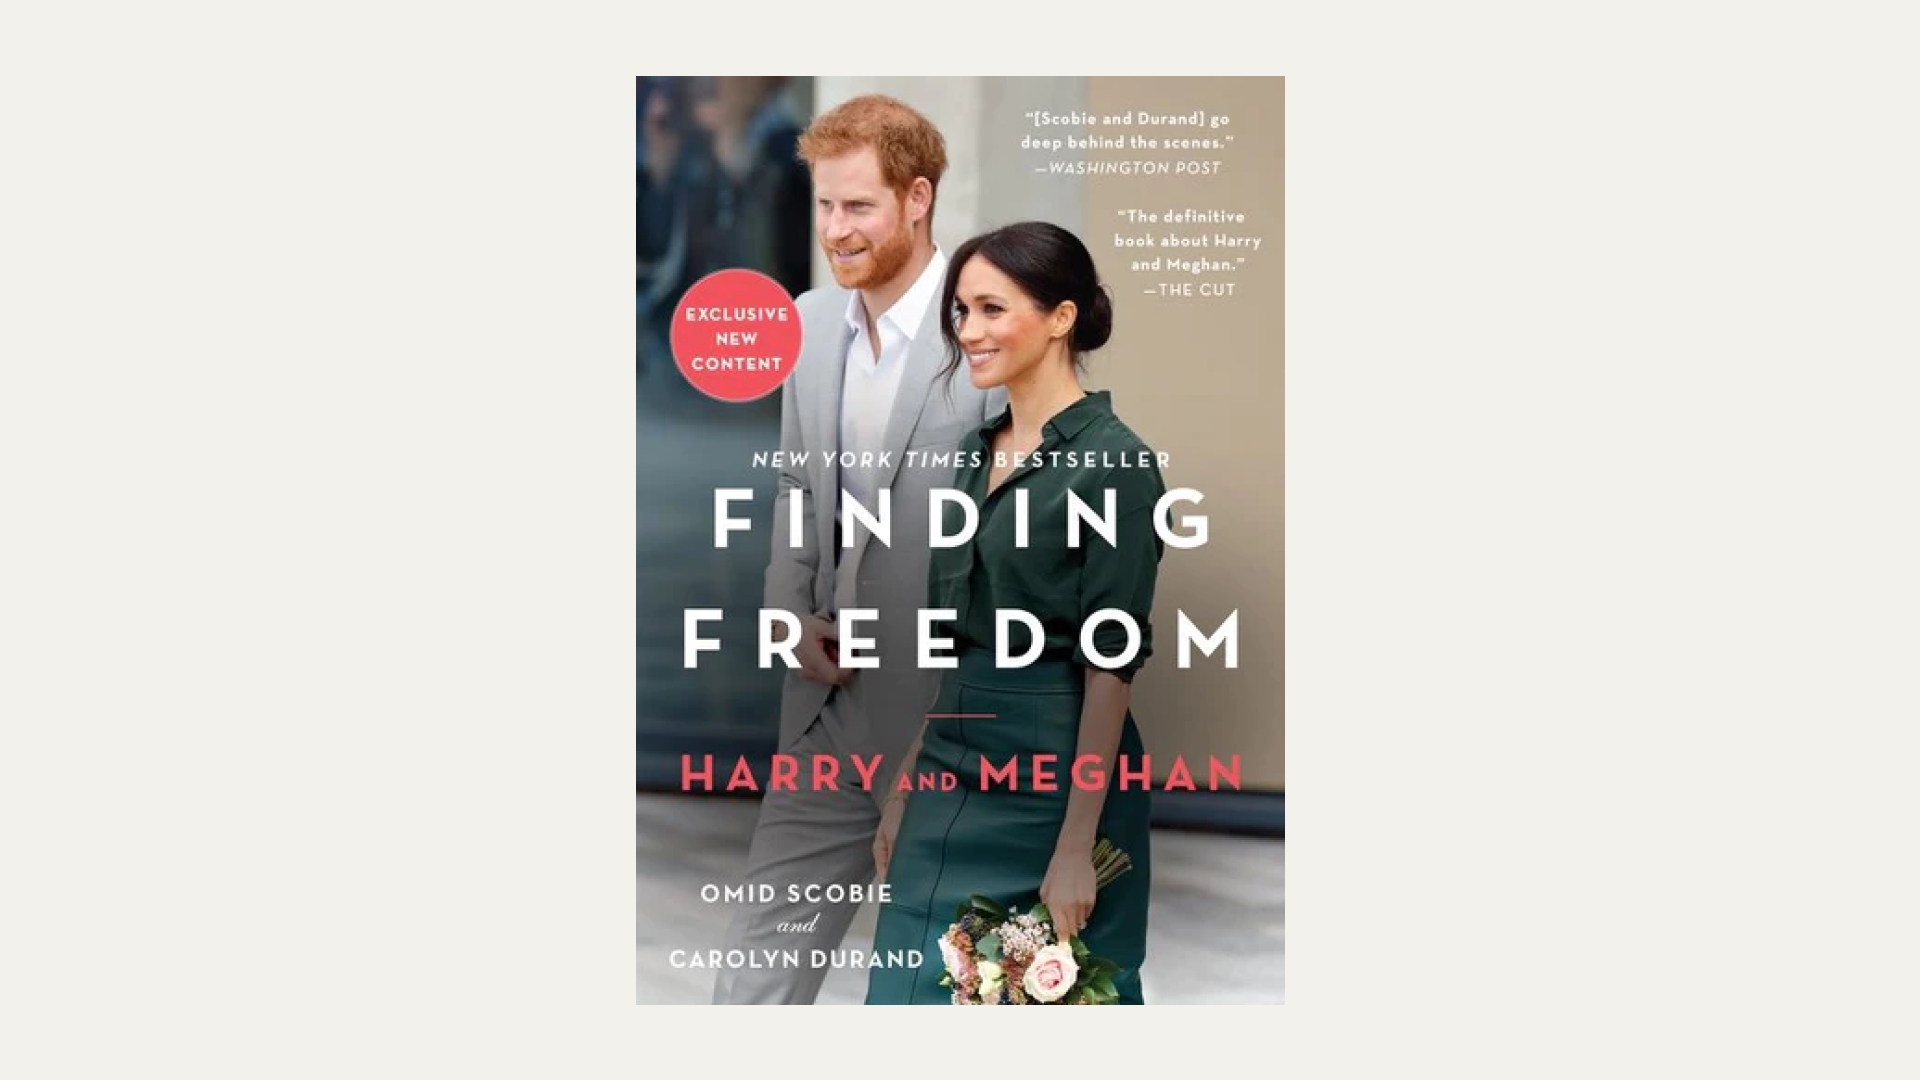 “Finding Freedom” by Omid Scobie and Carolyn Durand 